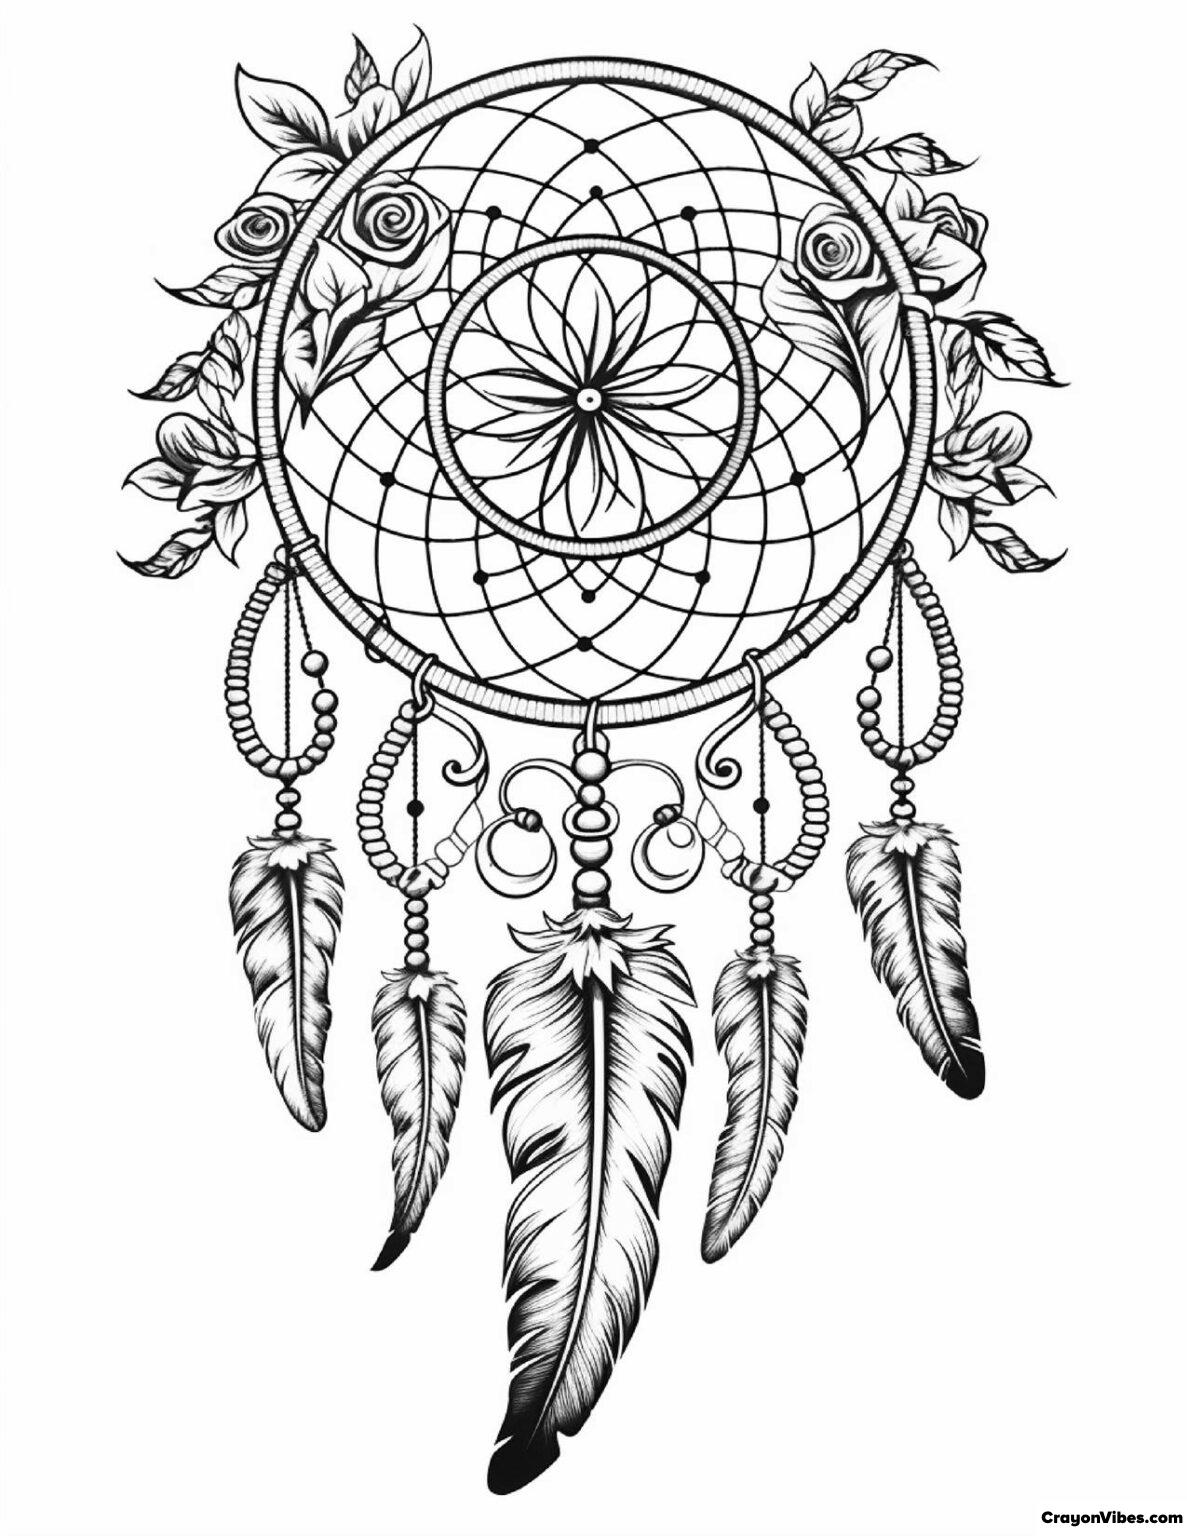 Dreamcatcher Coloring Pages Free Printable for Adults